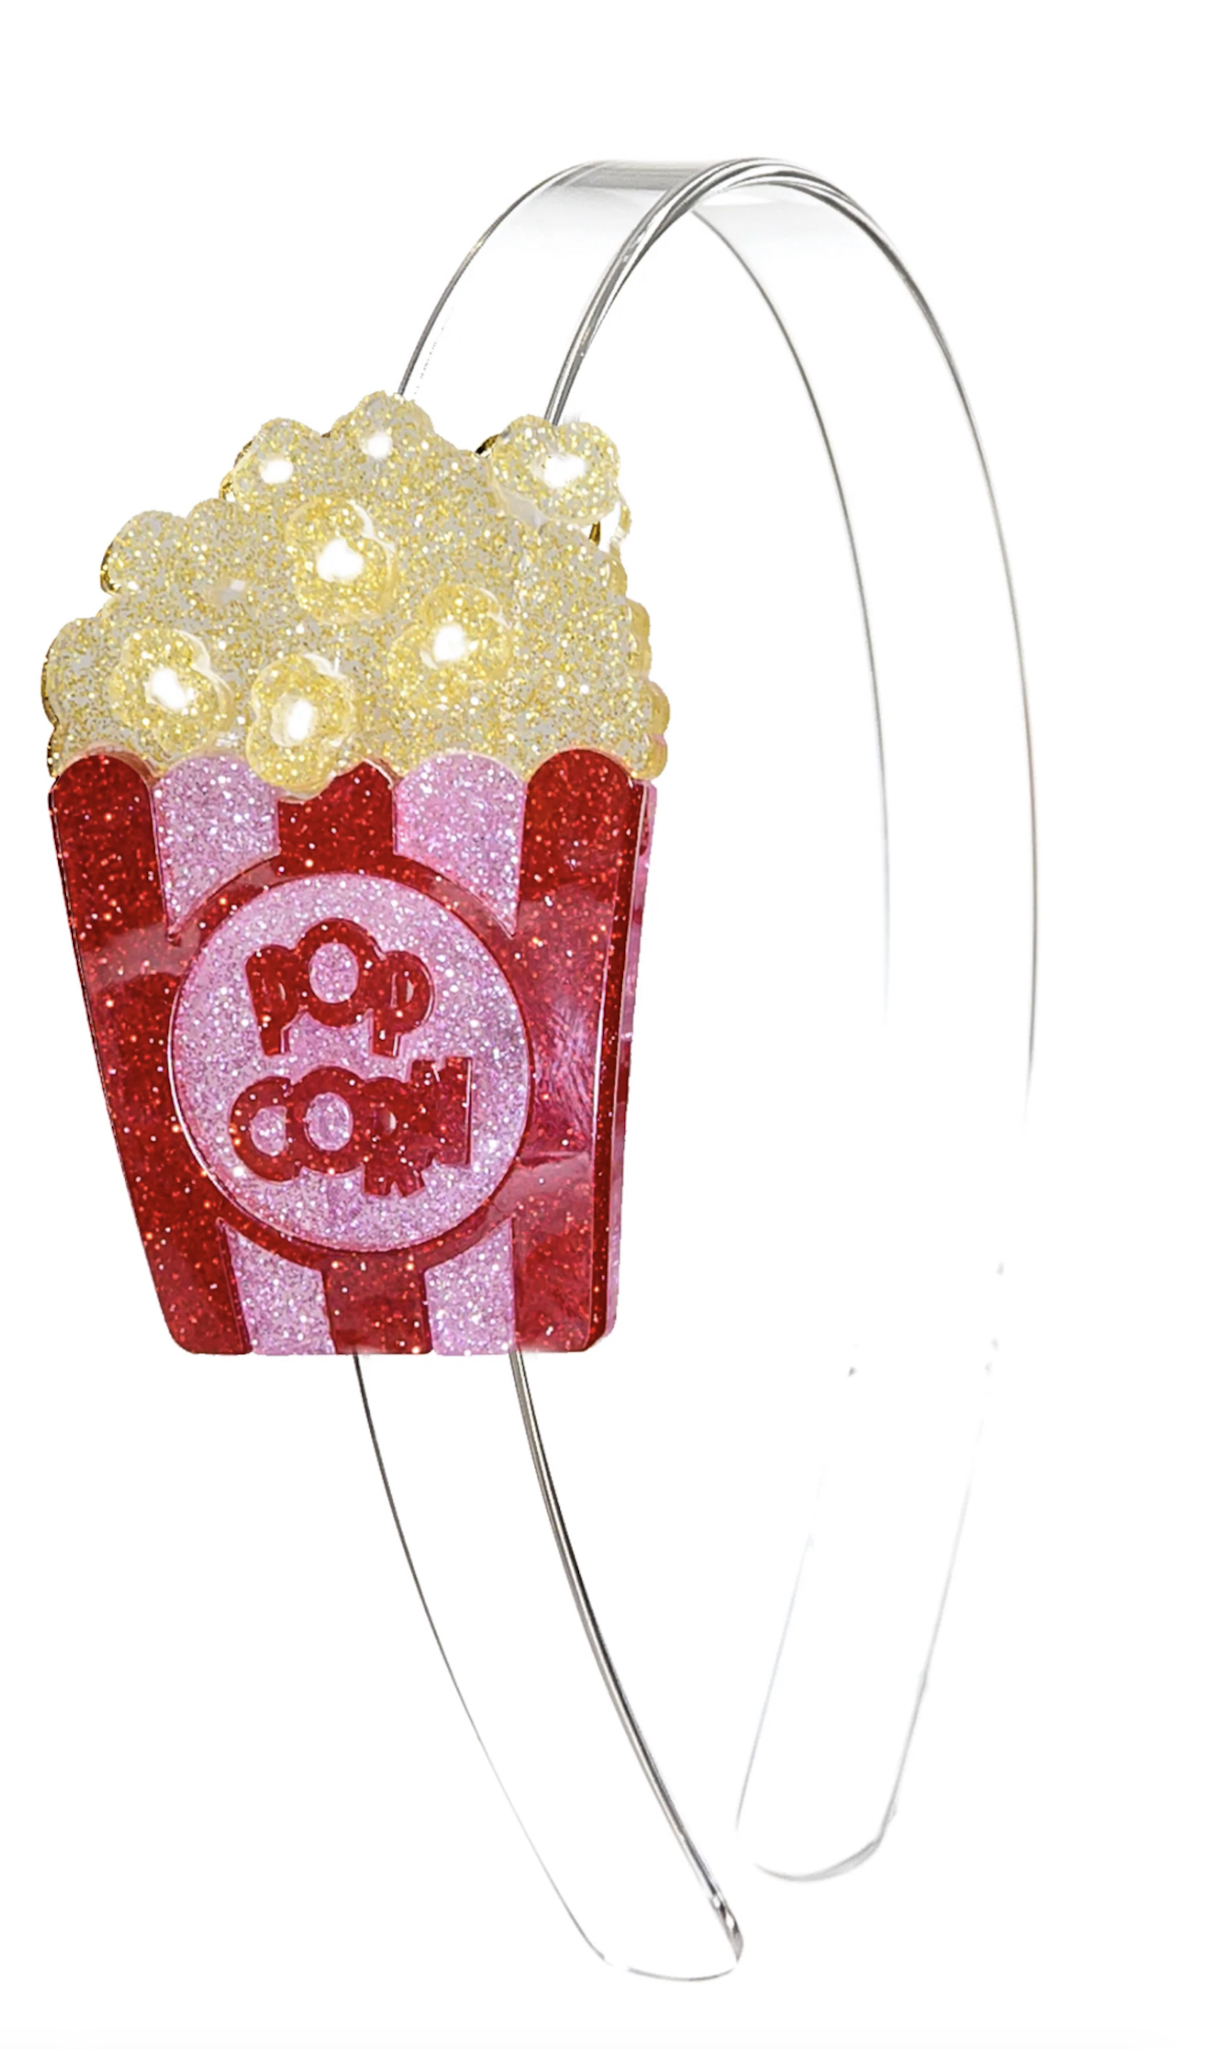 Go to school in style with this sparkly popcorn-themed headband.  (Courtesy of Just Shoes for Kids)